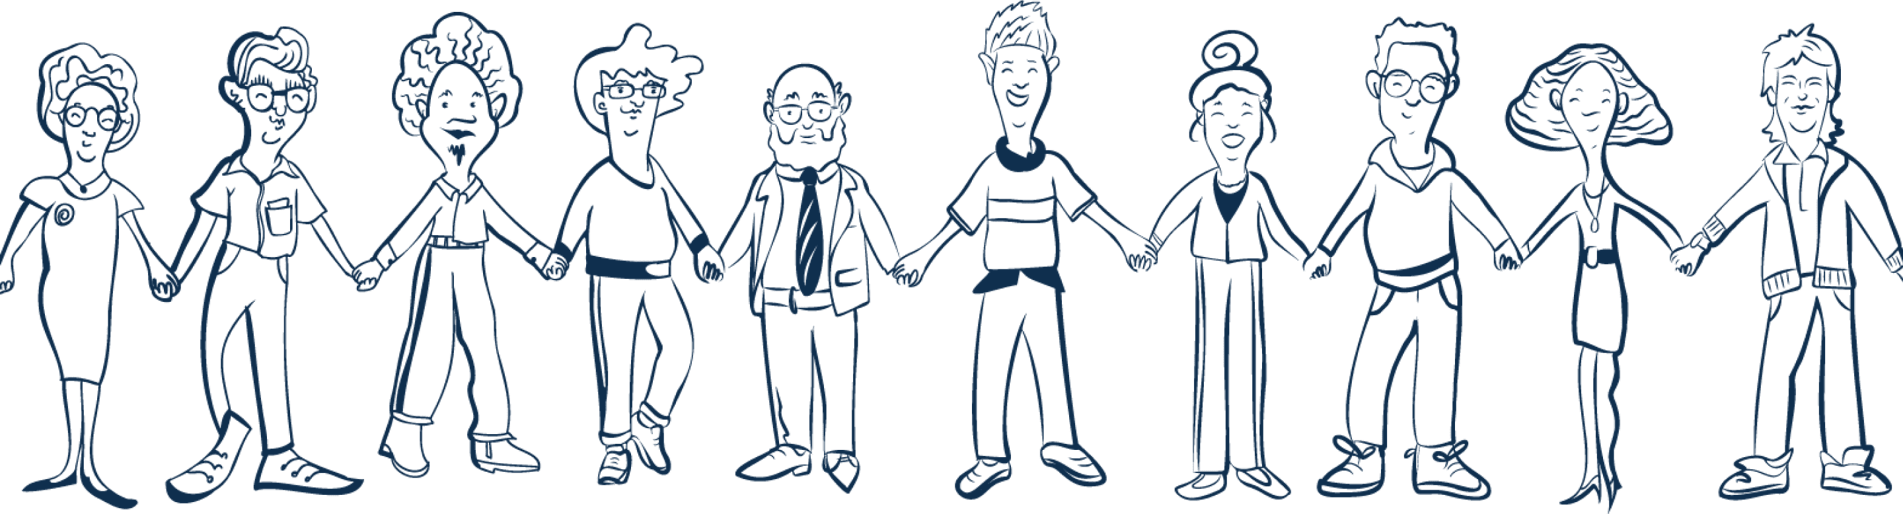 An illustration of strongDM users holding hands